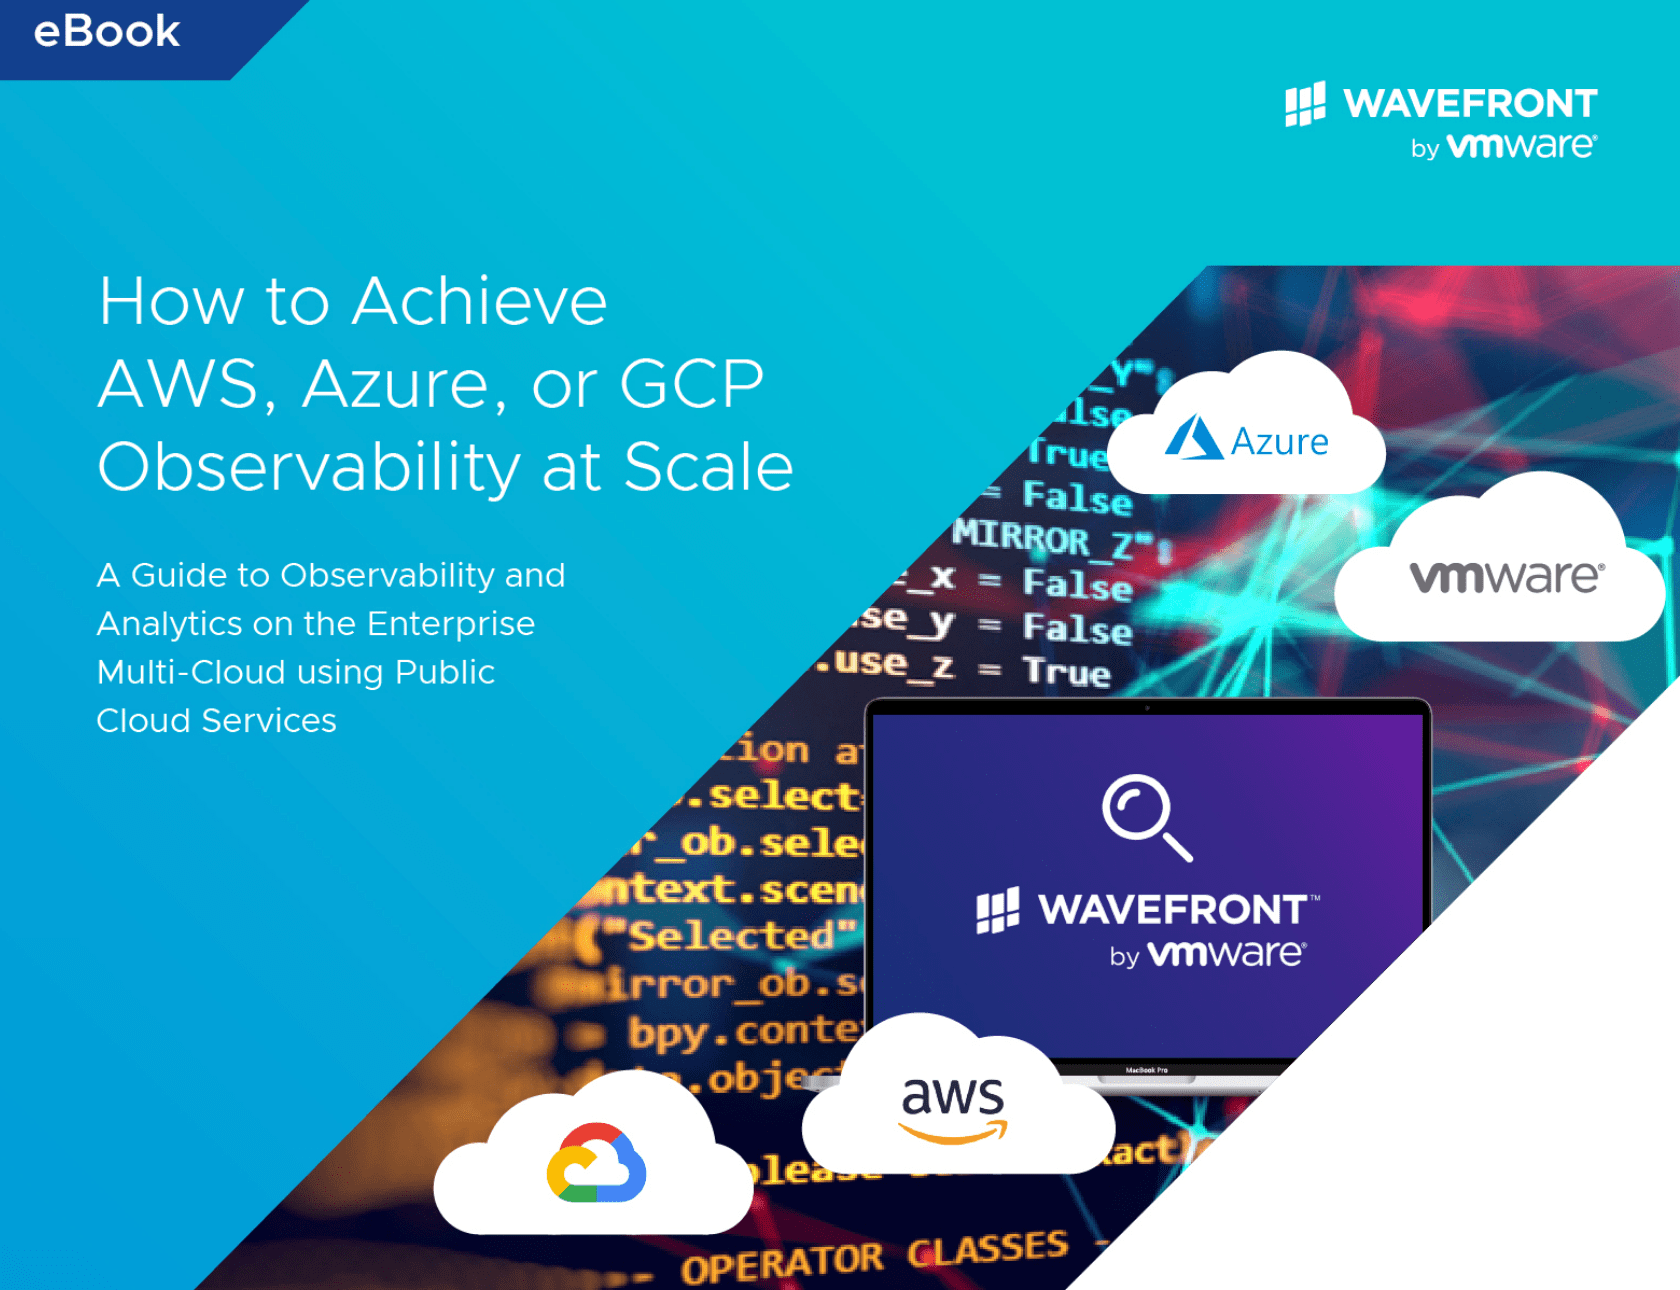 how to achieve aws - How to Achieve AWS, Azure, or GCP Observability at Scale